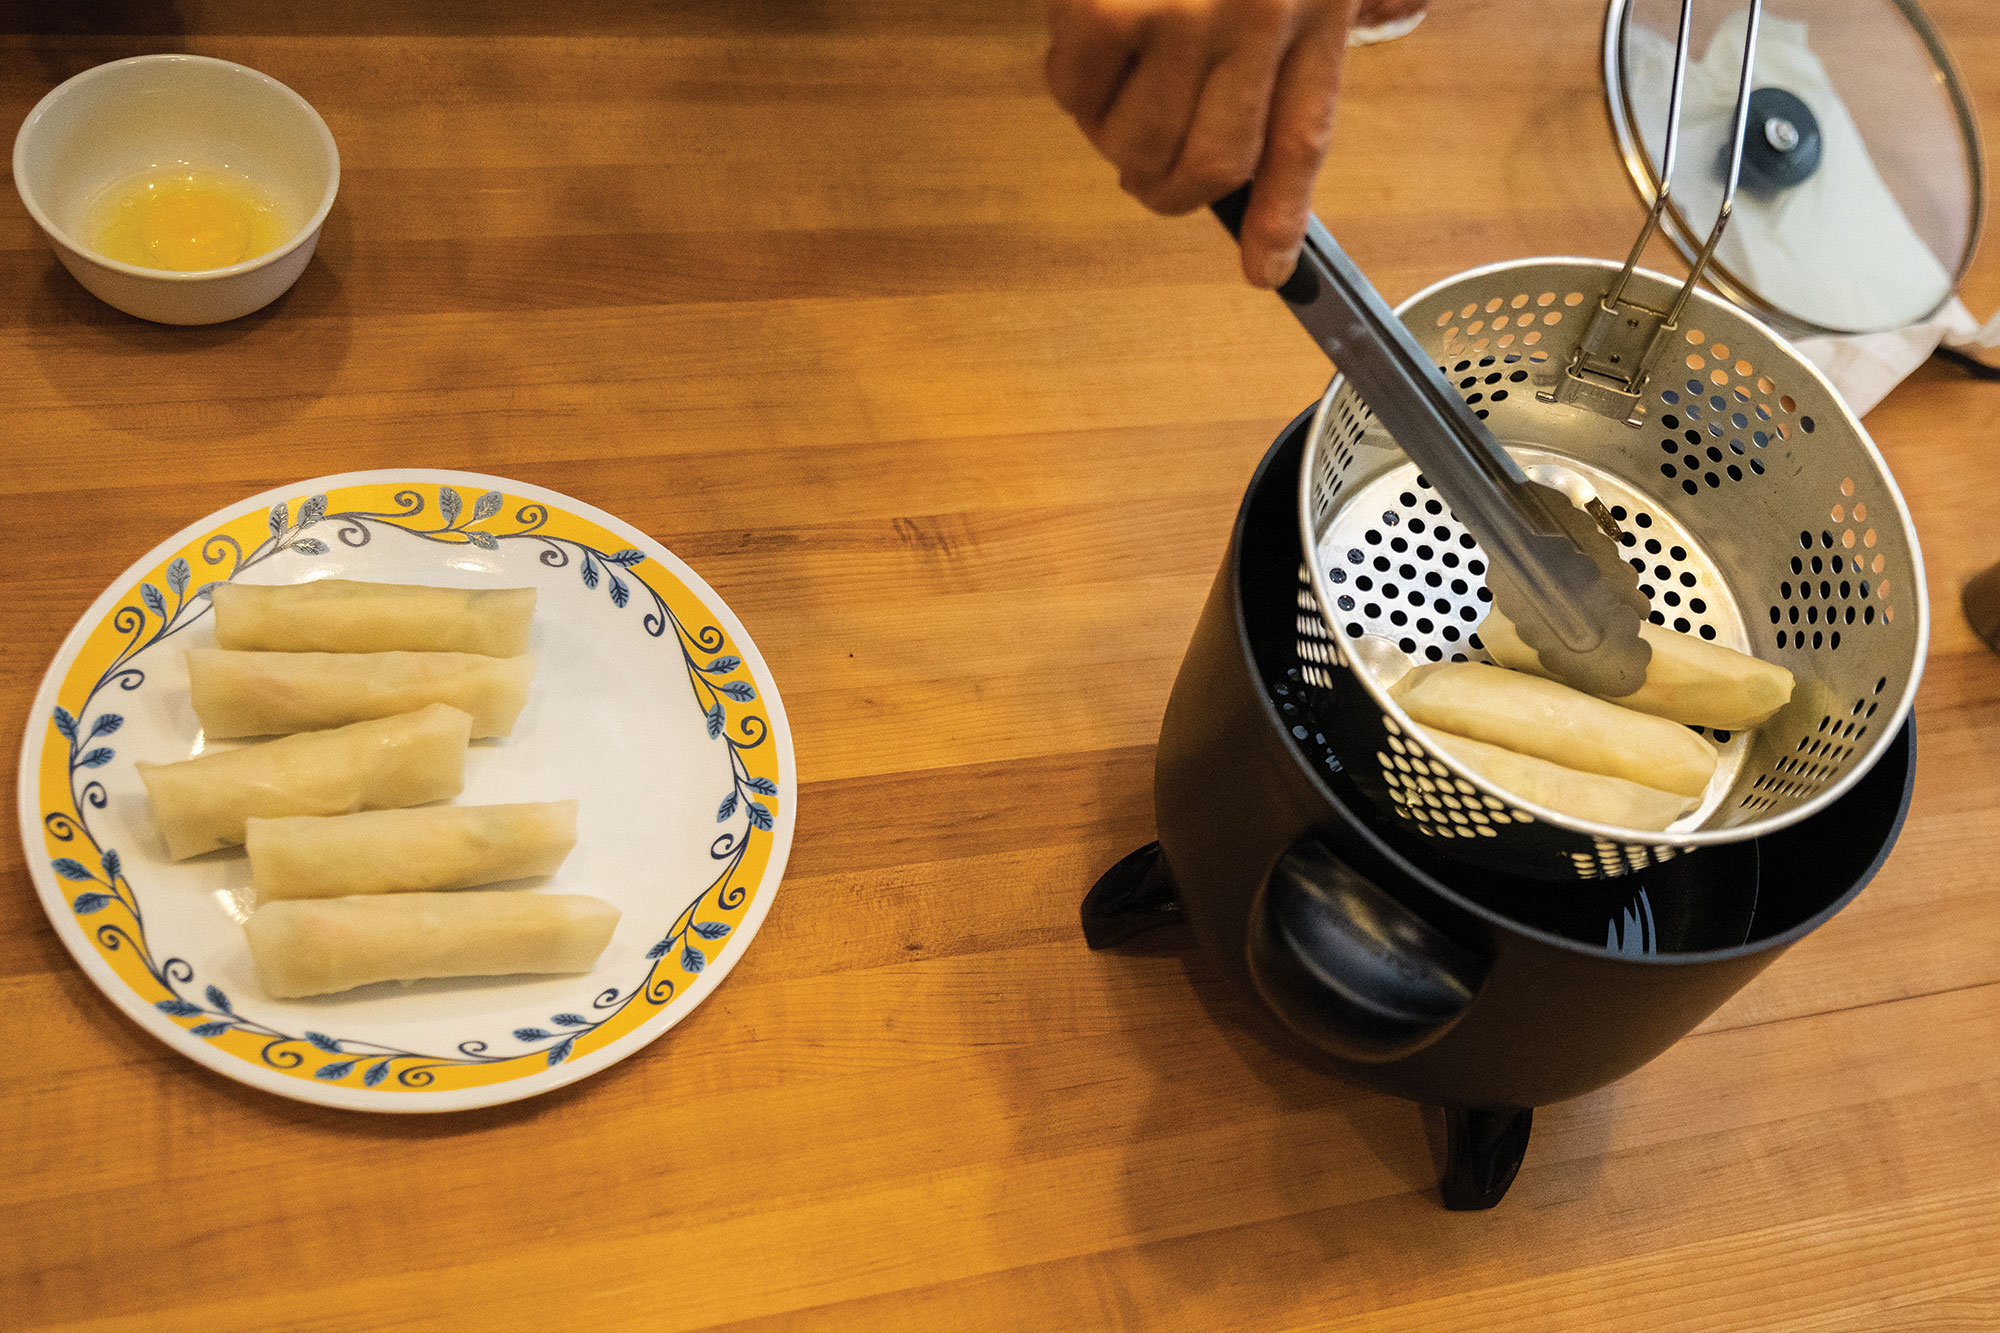 Placing egg rolls into the fryer